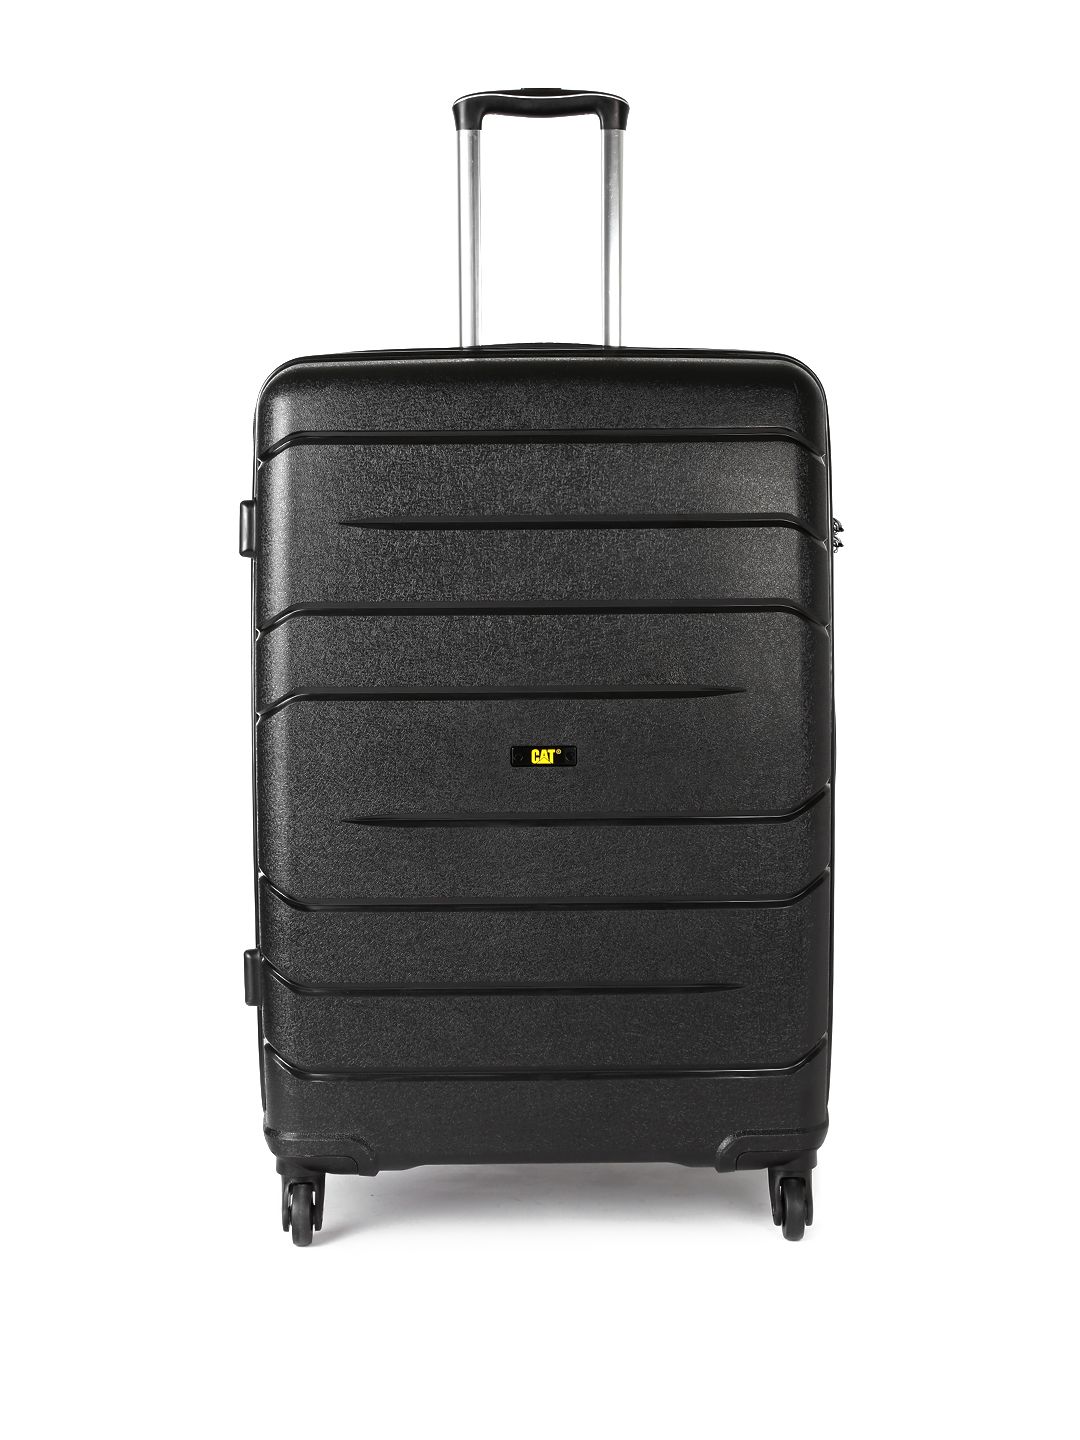 CAT Black Cargo Crosscheck 28" Checkin & Hardsided Large Trolley Suitcase Price in India